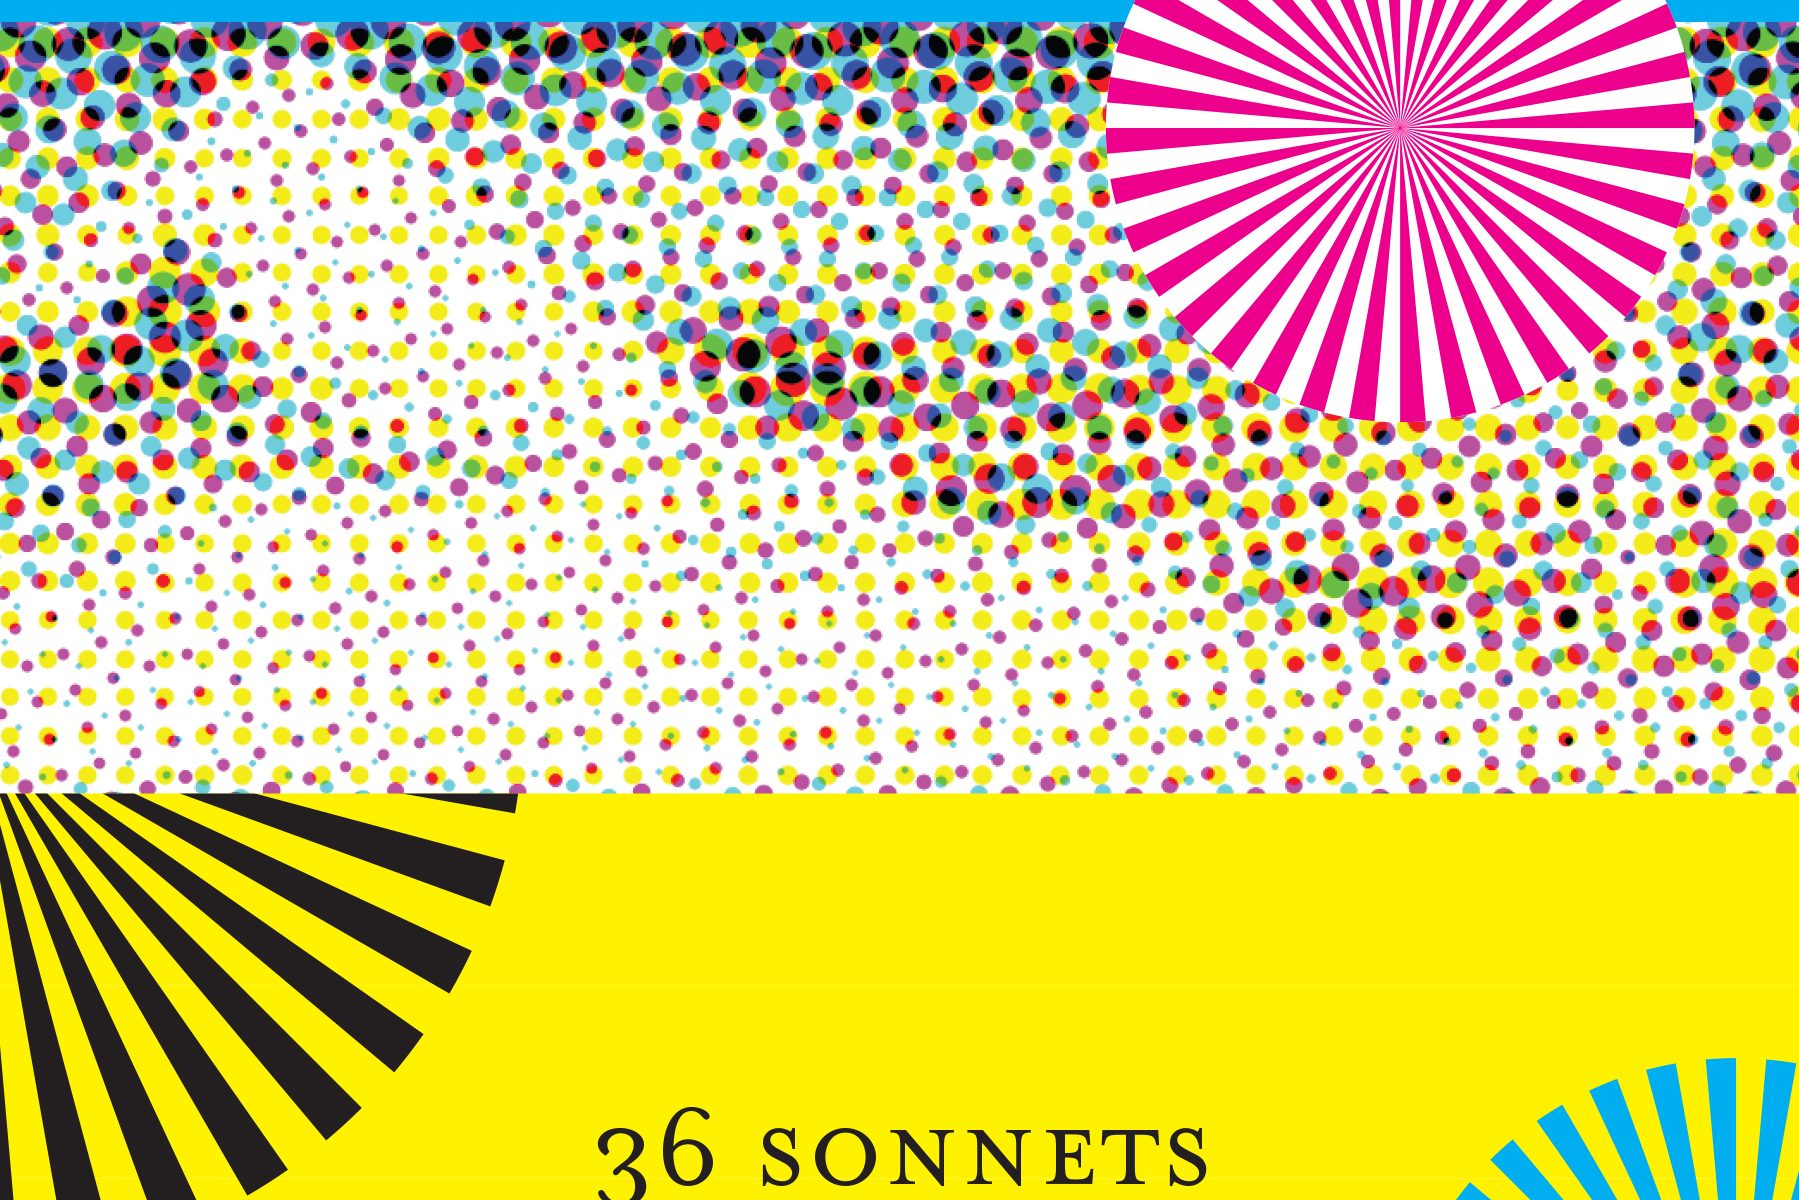 Mount Fuji, 36 Sonnets by Jay Hall Carpenter